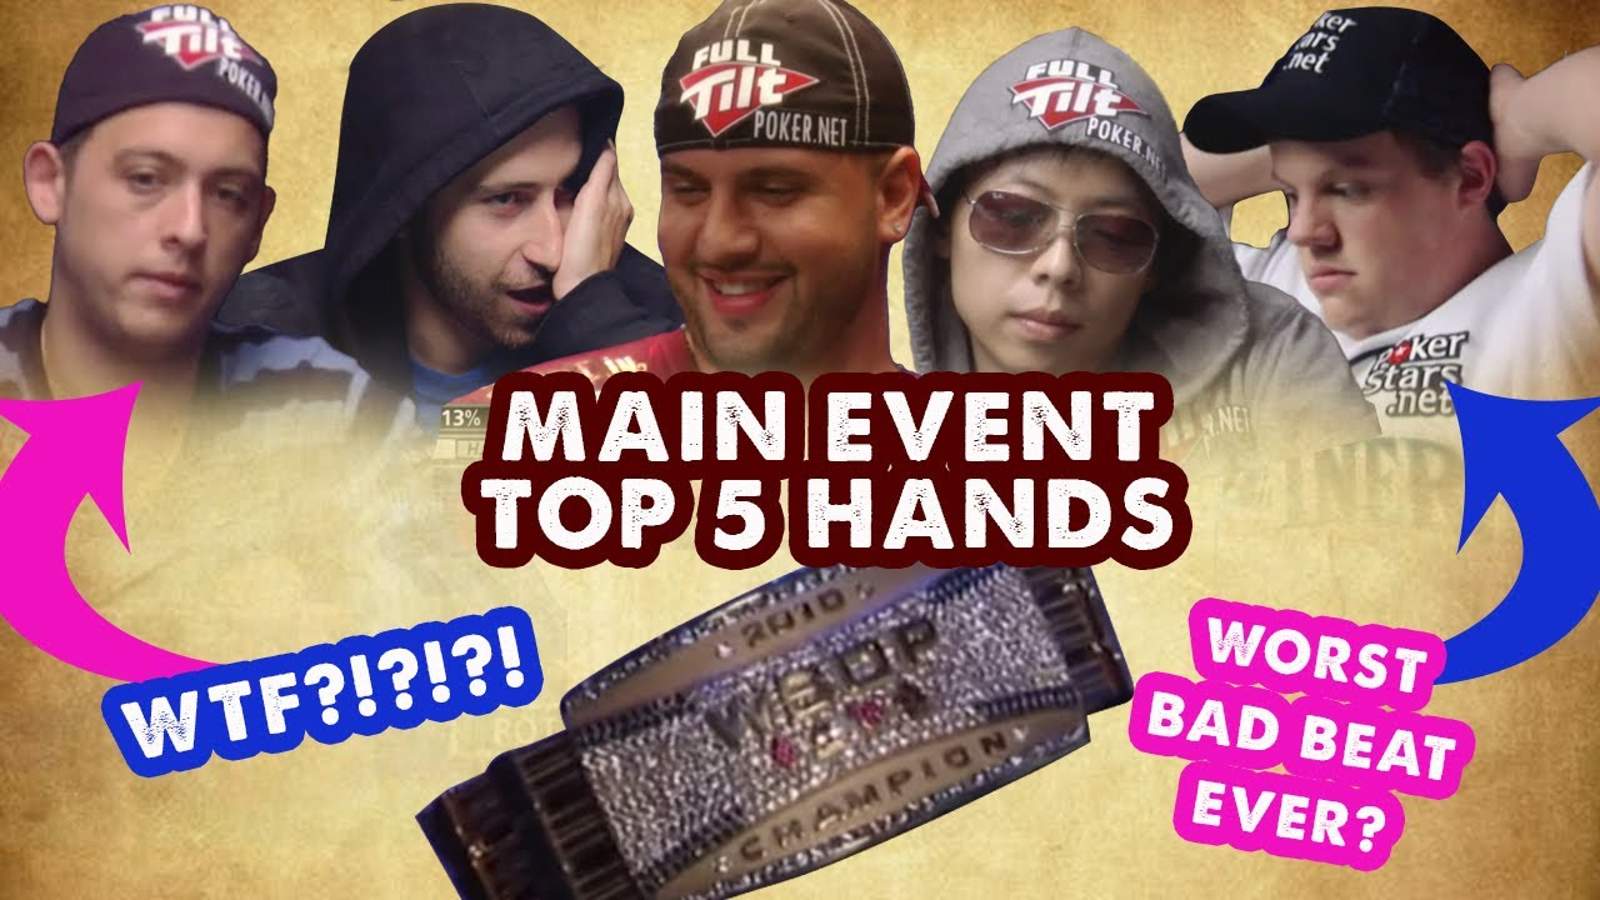 Watch the Top 5 Hands from the 2010 WSOP Main Event Now